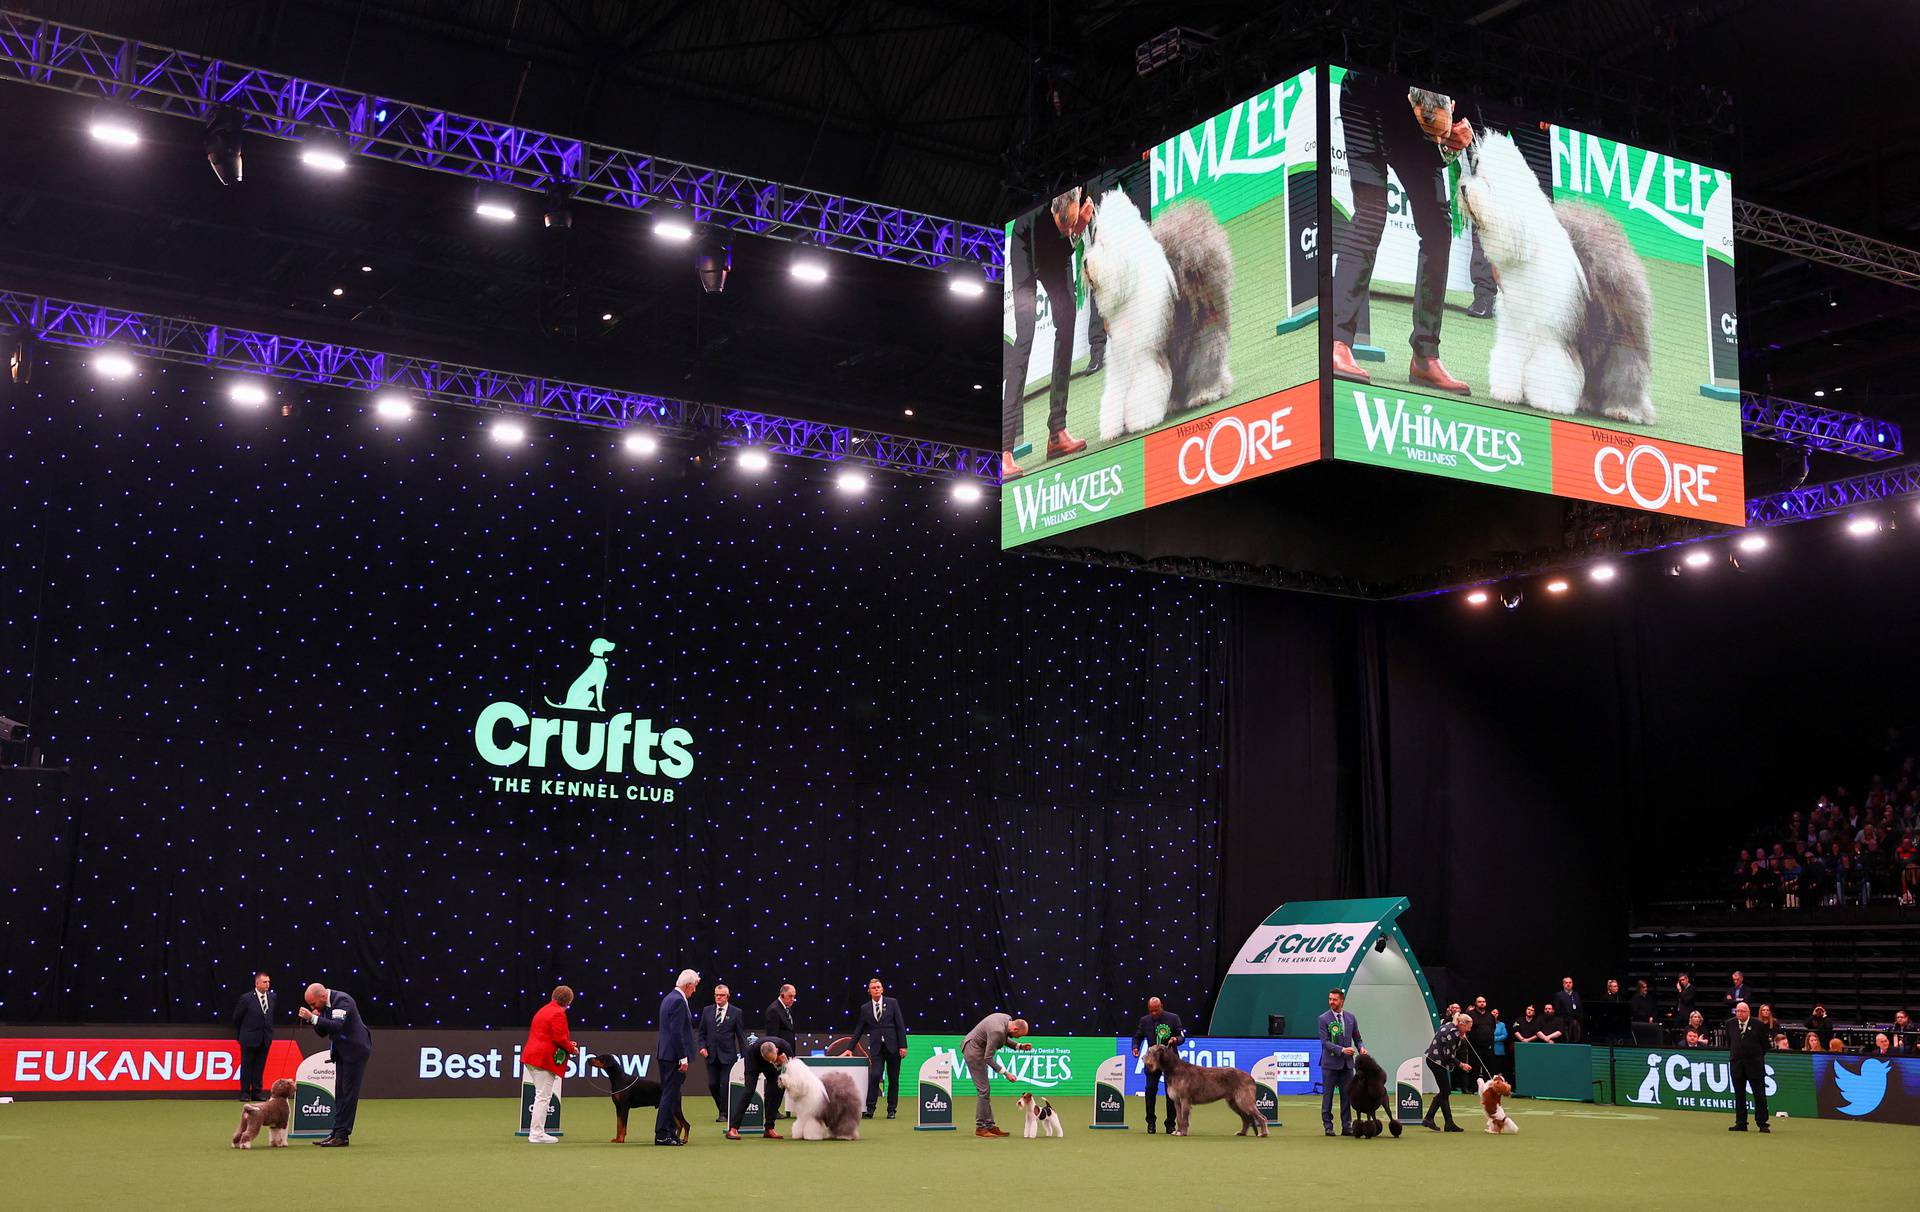 Final day of the Crufts Dog Show in Birmingham